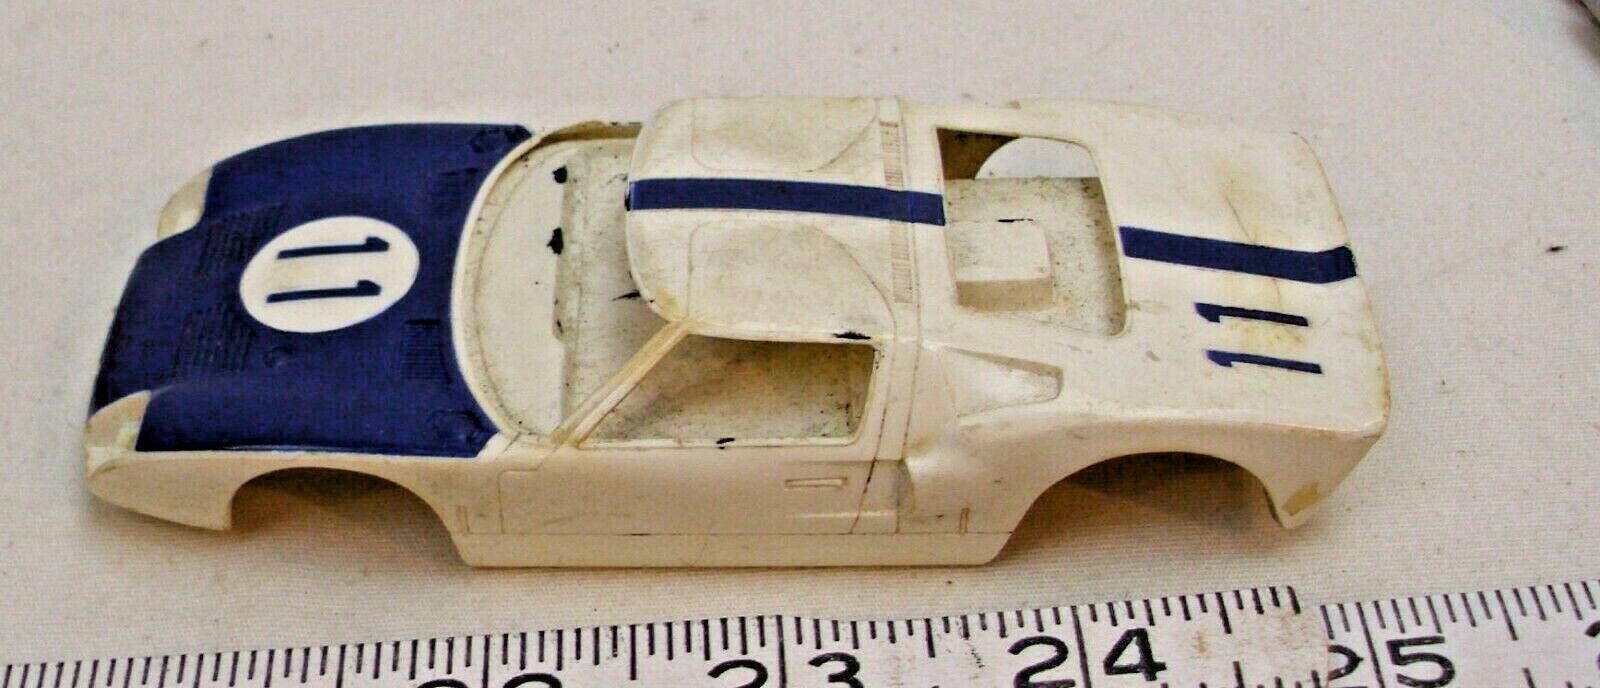 Strombecker Ford Gt Racing Slot Car Body 1/32